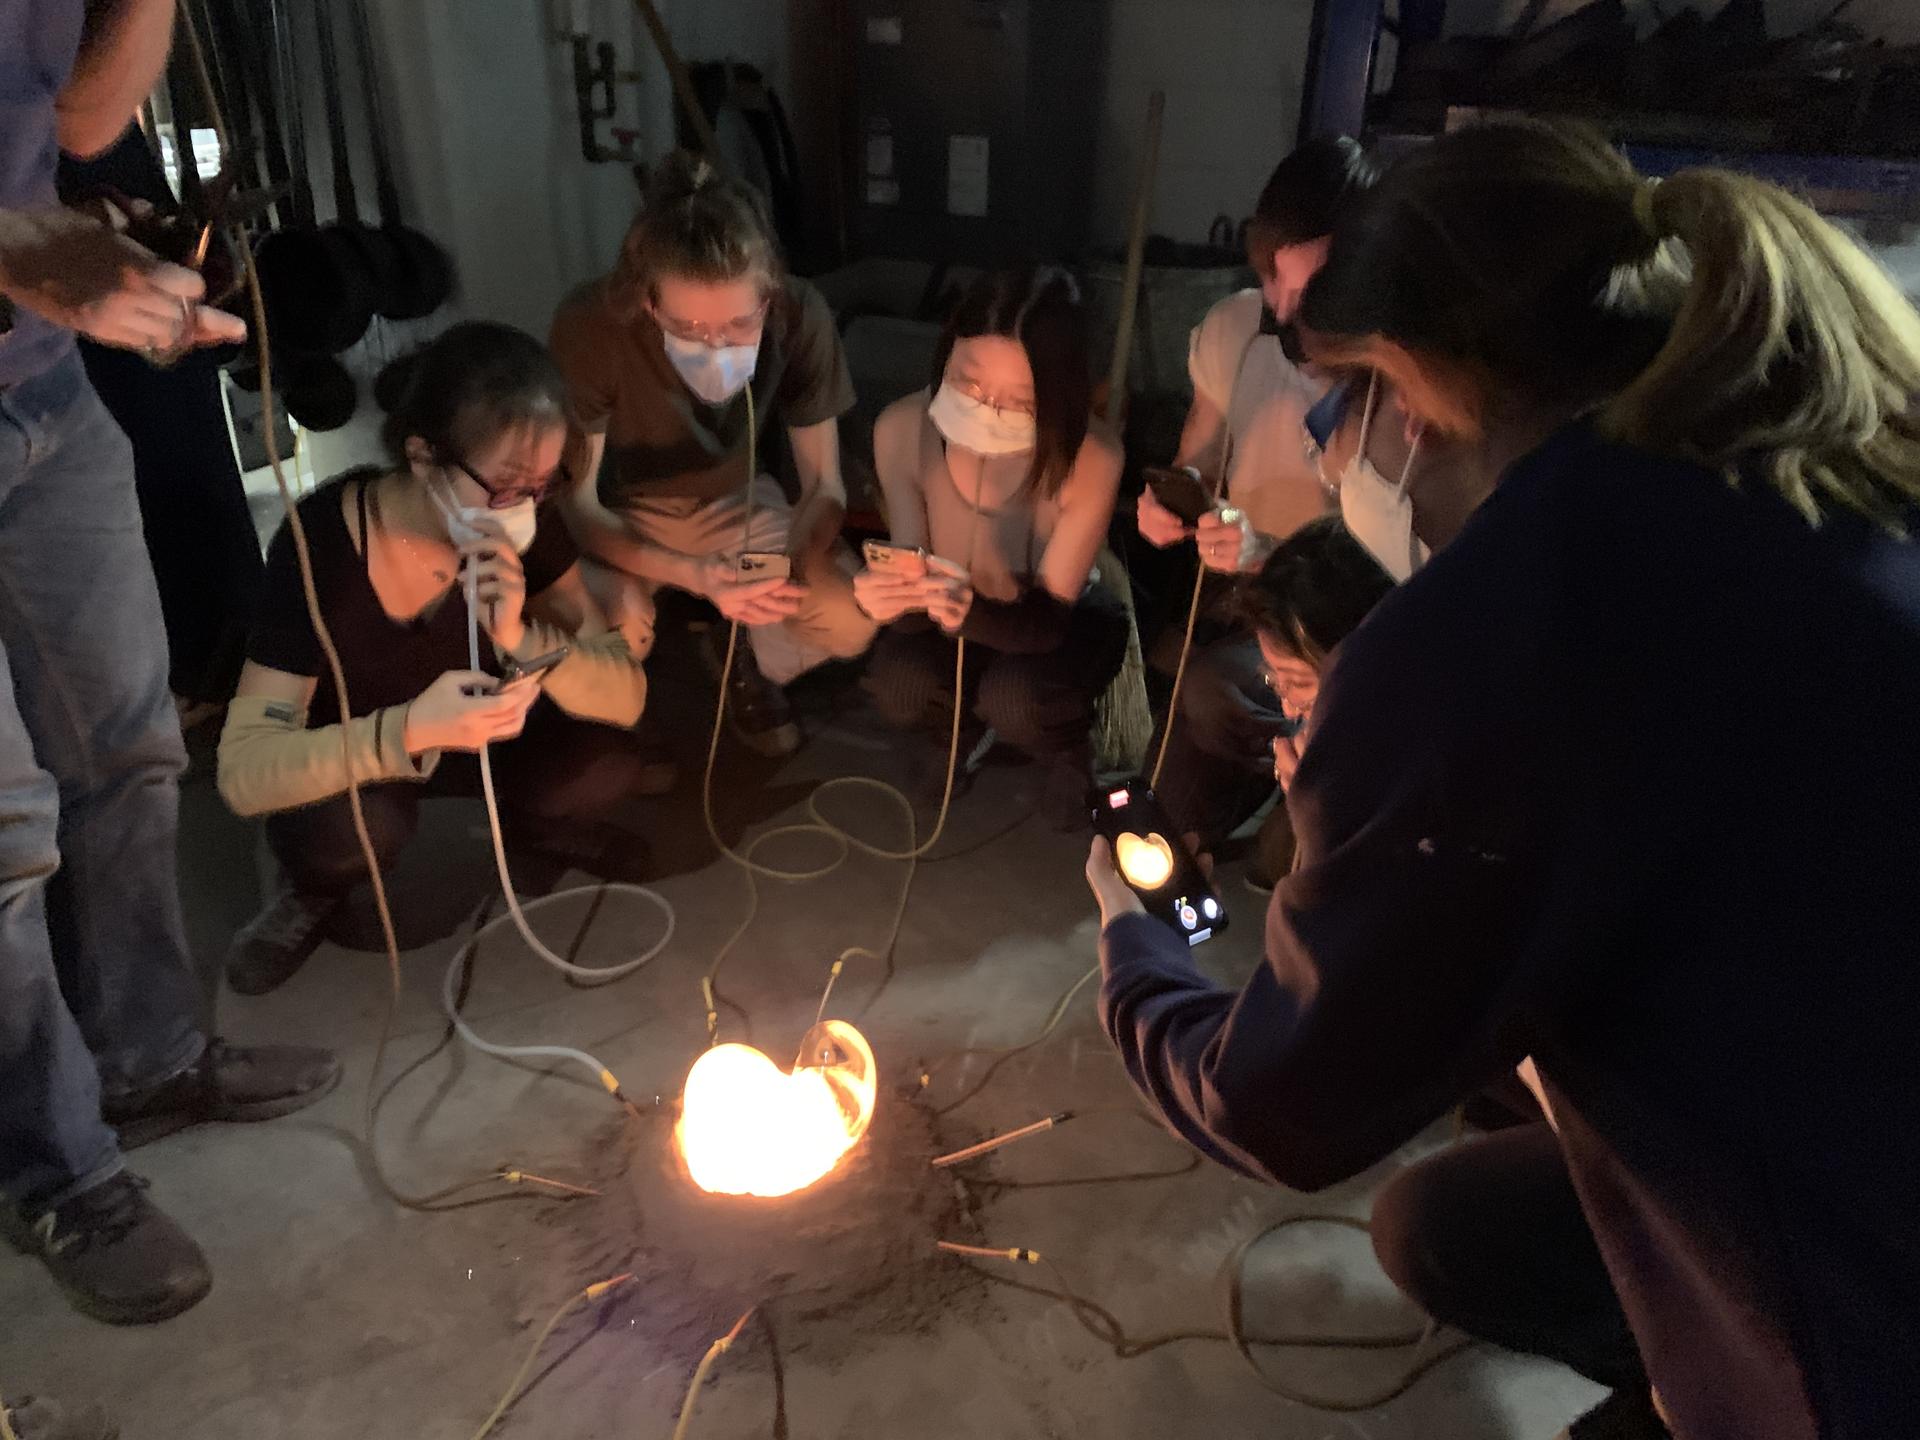 A group of students surround a glowing lump of glass in a pile of dirt on the floor. Each has a tube in their mouth that connects to the pile of dirt on the floor below the glass.